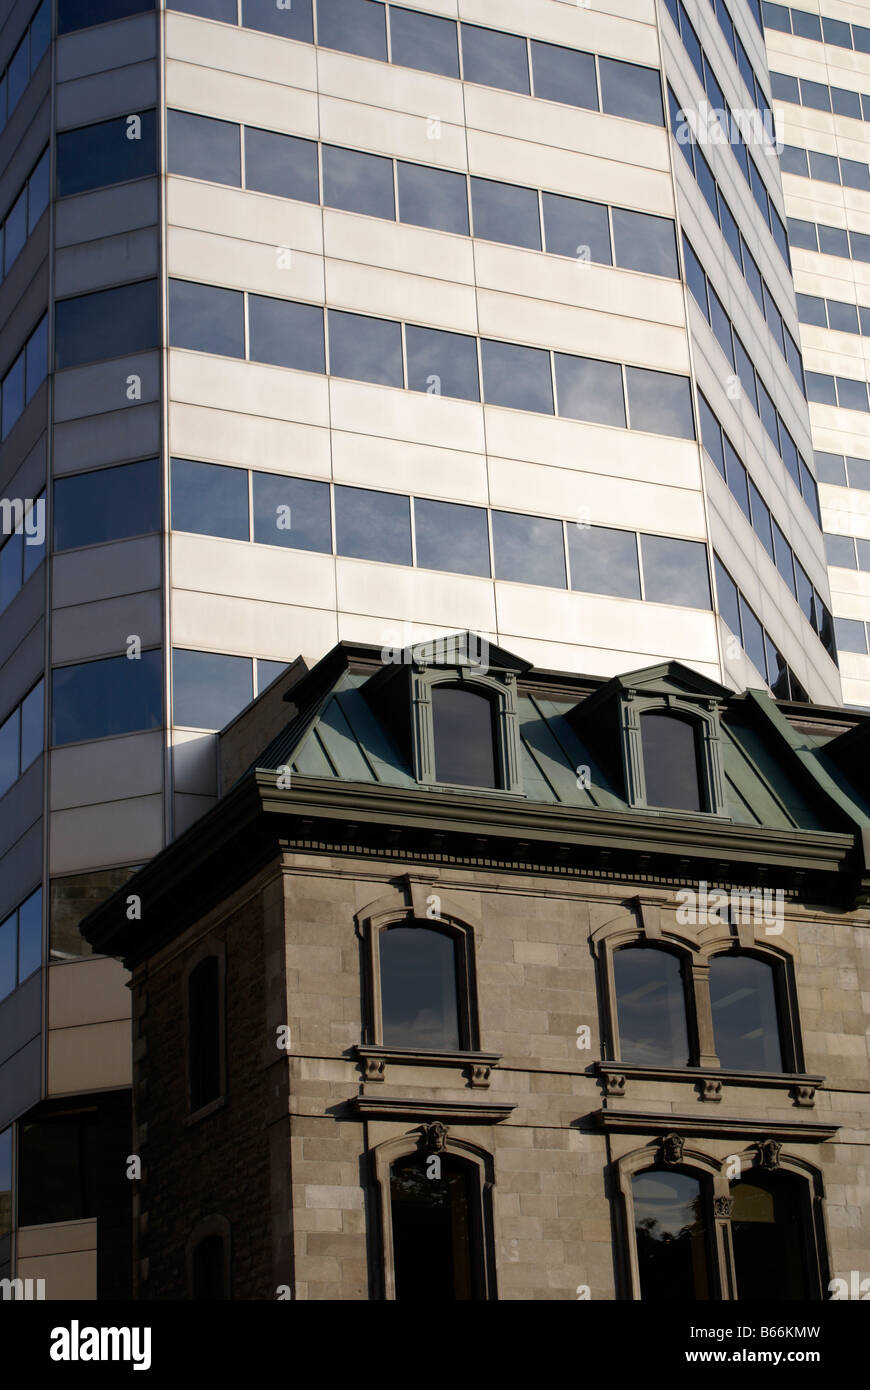 Old and new architecture on Sherbrooke Street in downtown Montreal, Quebec, Canada Stock Photo